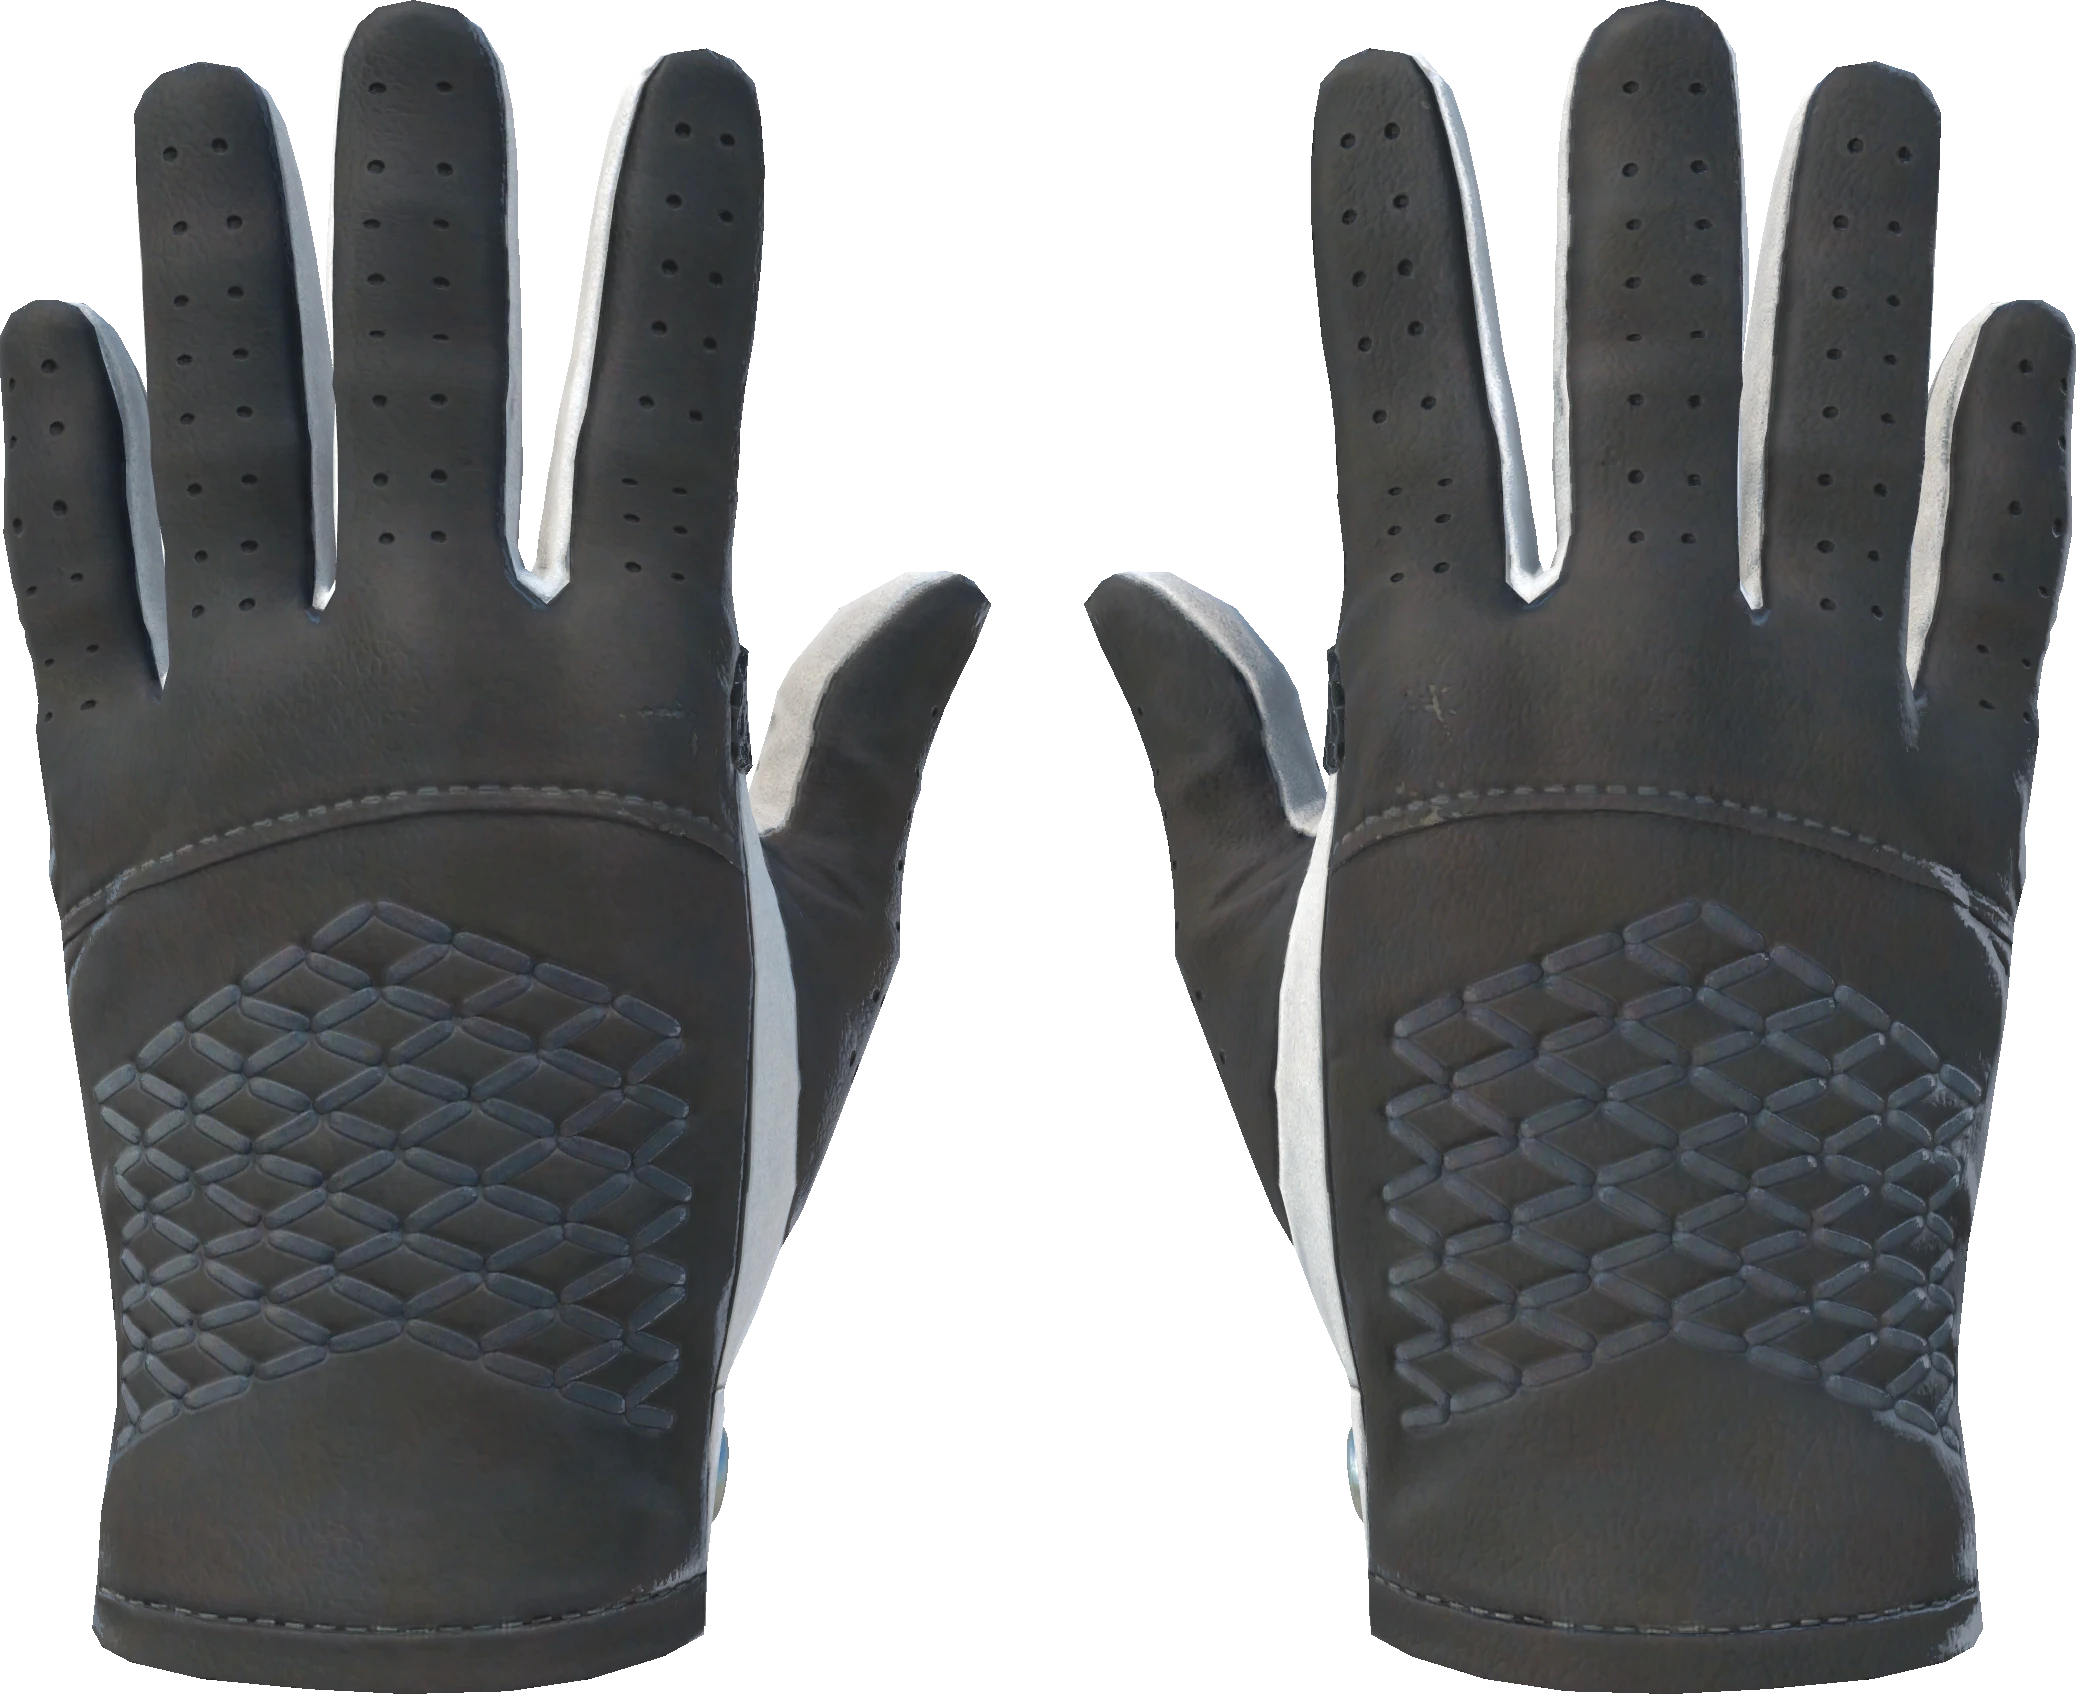 Driver Gloves | Black Tie (Factory New)